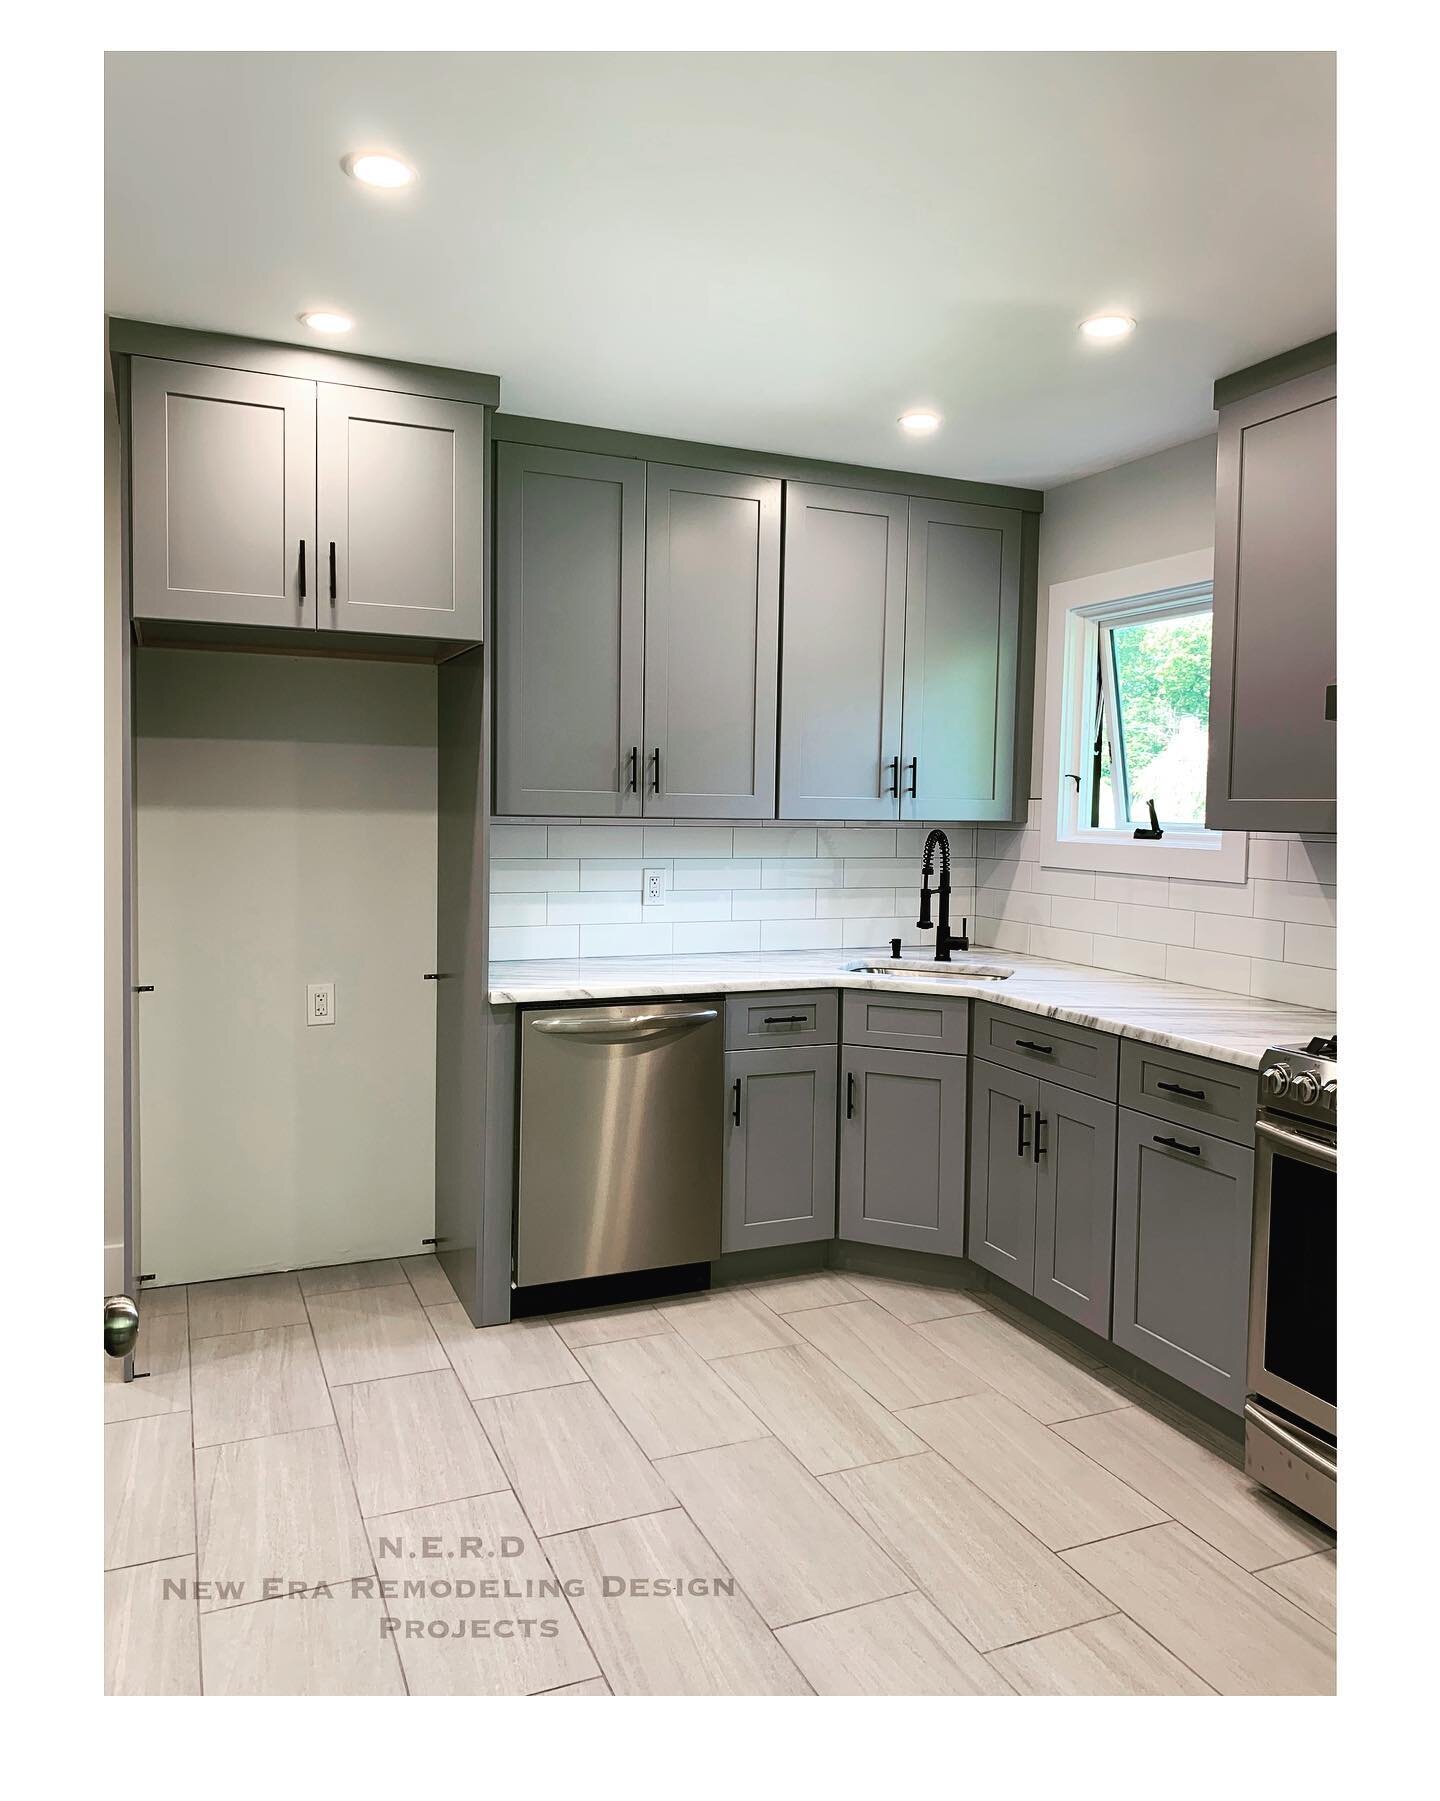 Complete kitchen redesign &amp; remodel. Swipe for full before &amp; after. #TeamNeRdProjects #interiorremodeling #homeimprovement #builder #houzz #HGTV #brooklyncontractor #interiordesign #remodeling #spaceplanning #architecturedesign #dyi #architec